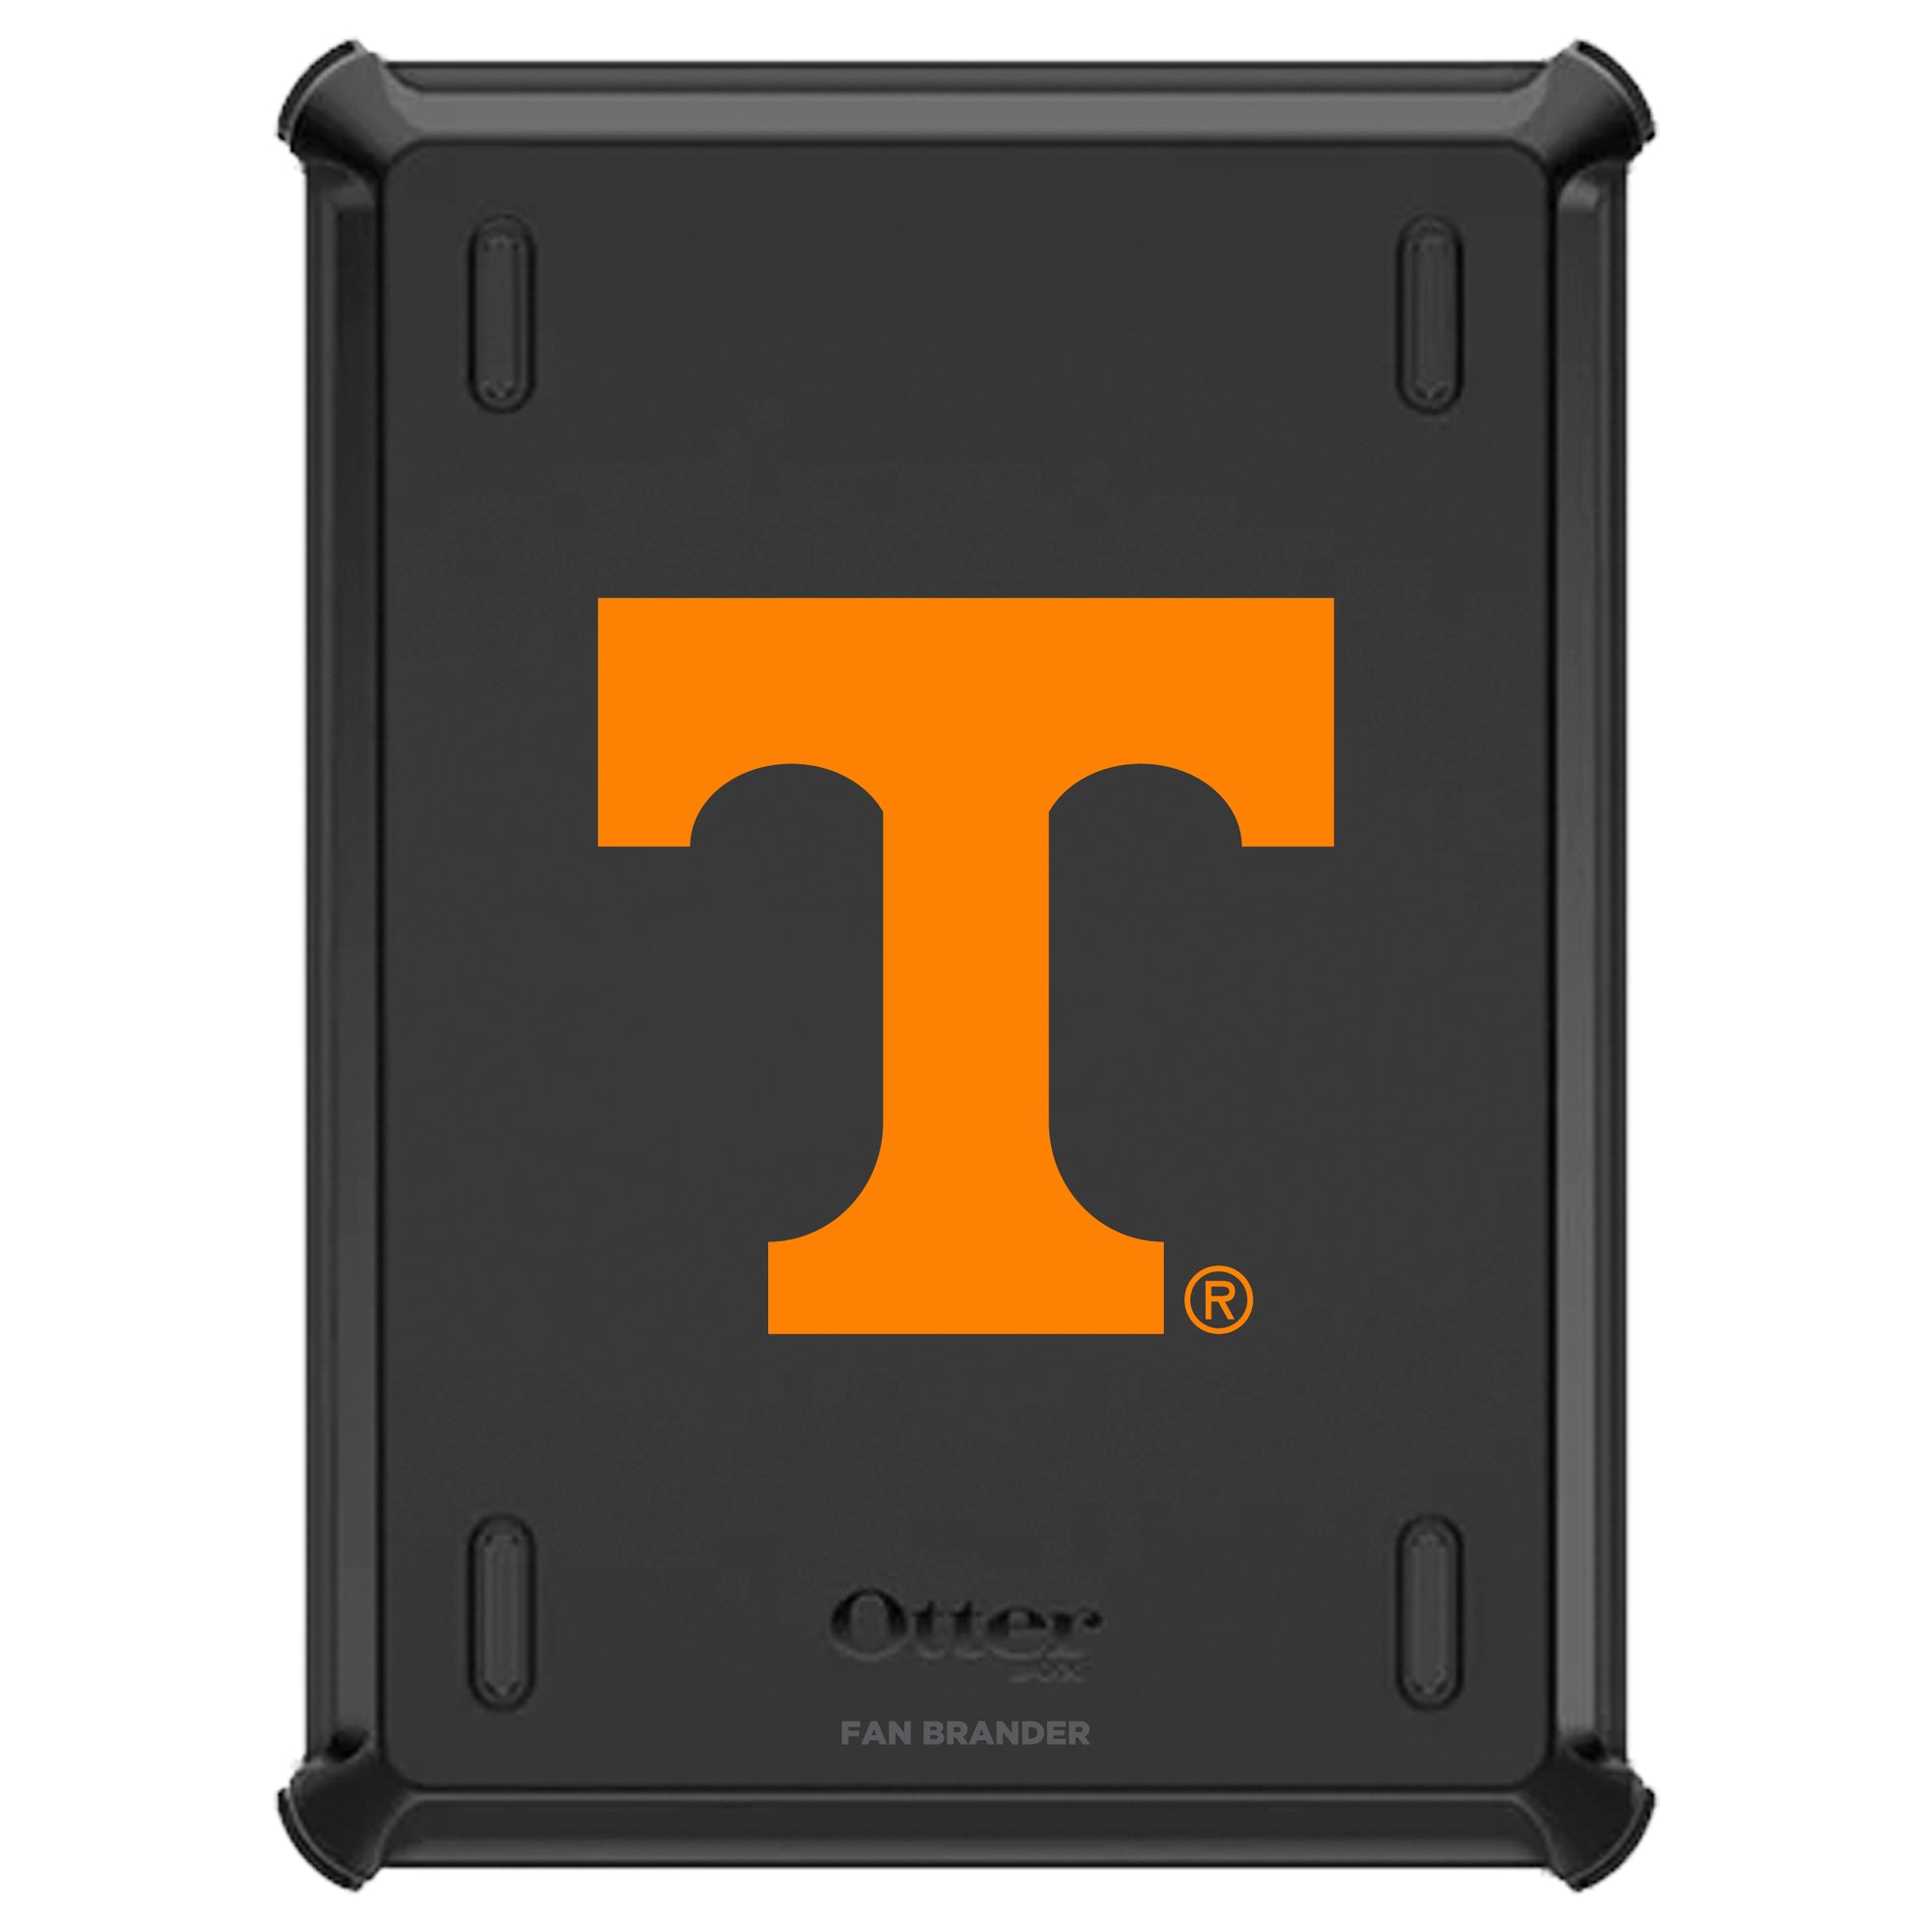 Tennessee Vols iPad (5th and 6th gen) Otterbox Defender Series Case